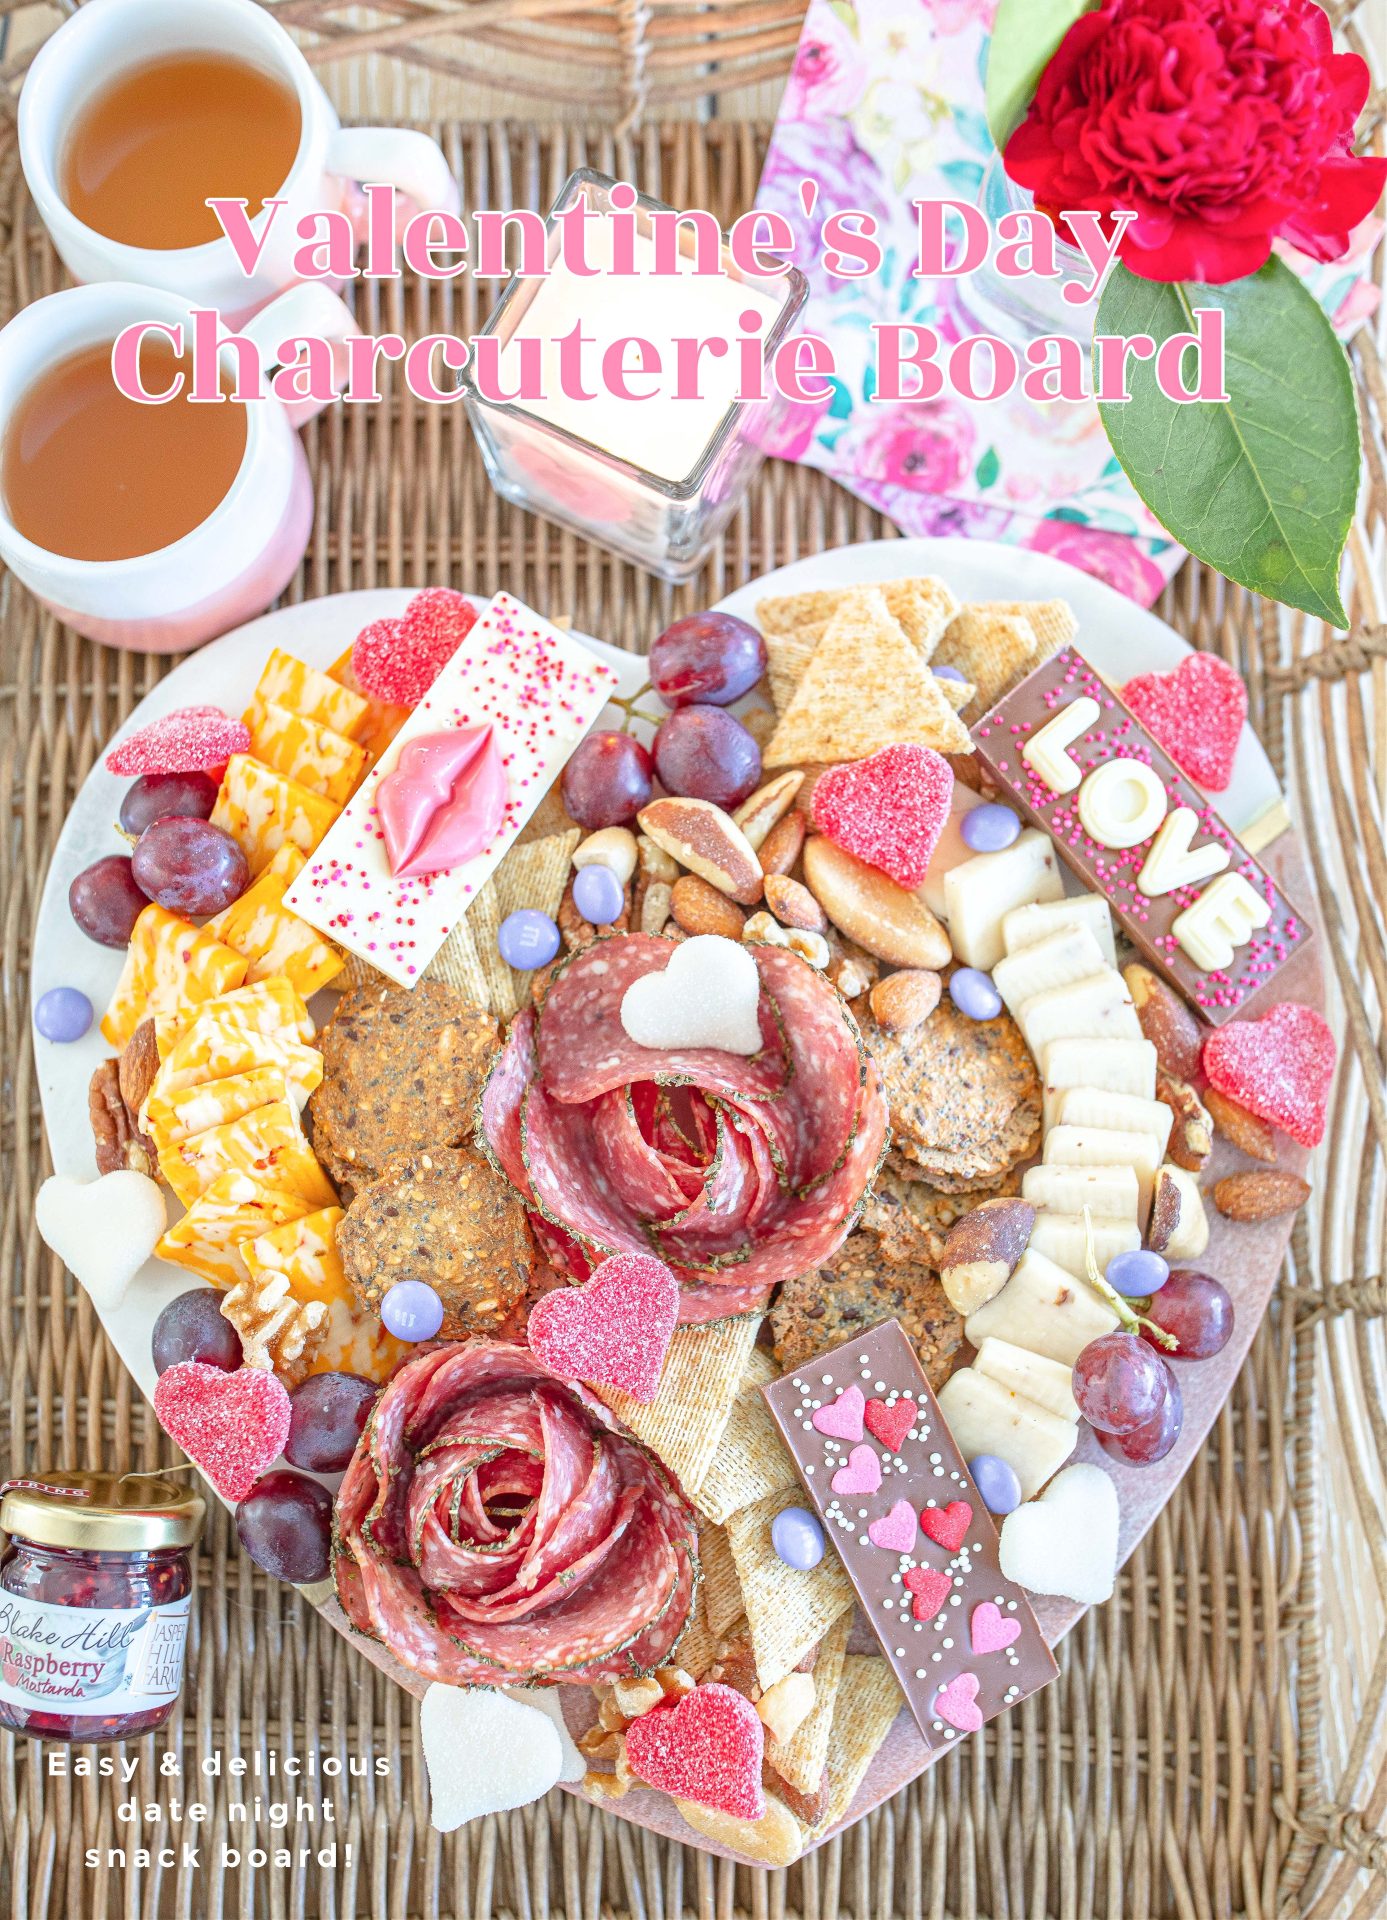 Charcuterie board, date night, valentines day, chocolates, baxter village chocolate, cheese board, meat and cheese, kombucha, date night board, valentines day recipe